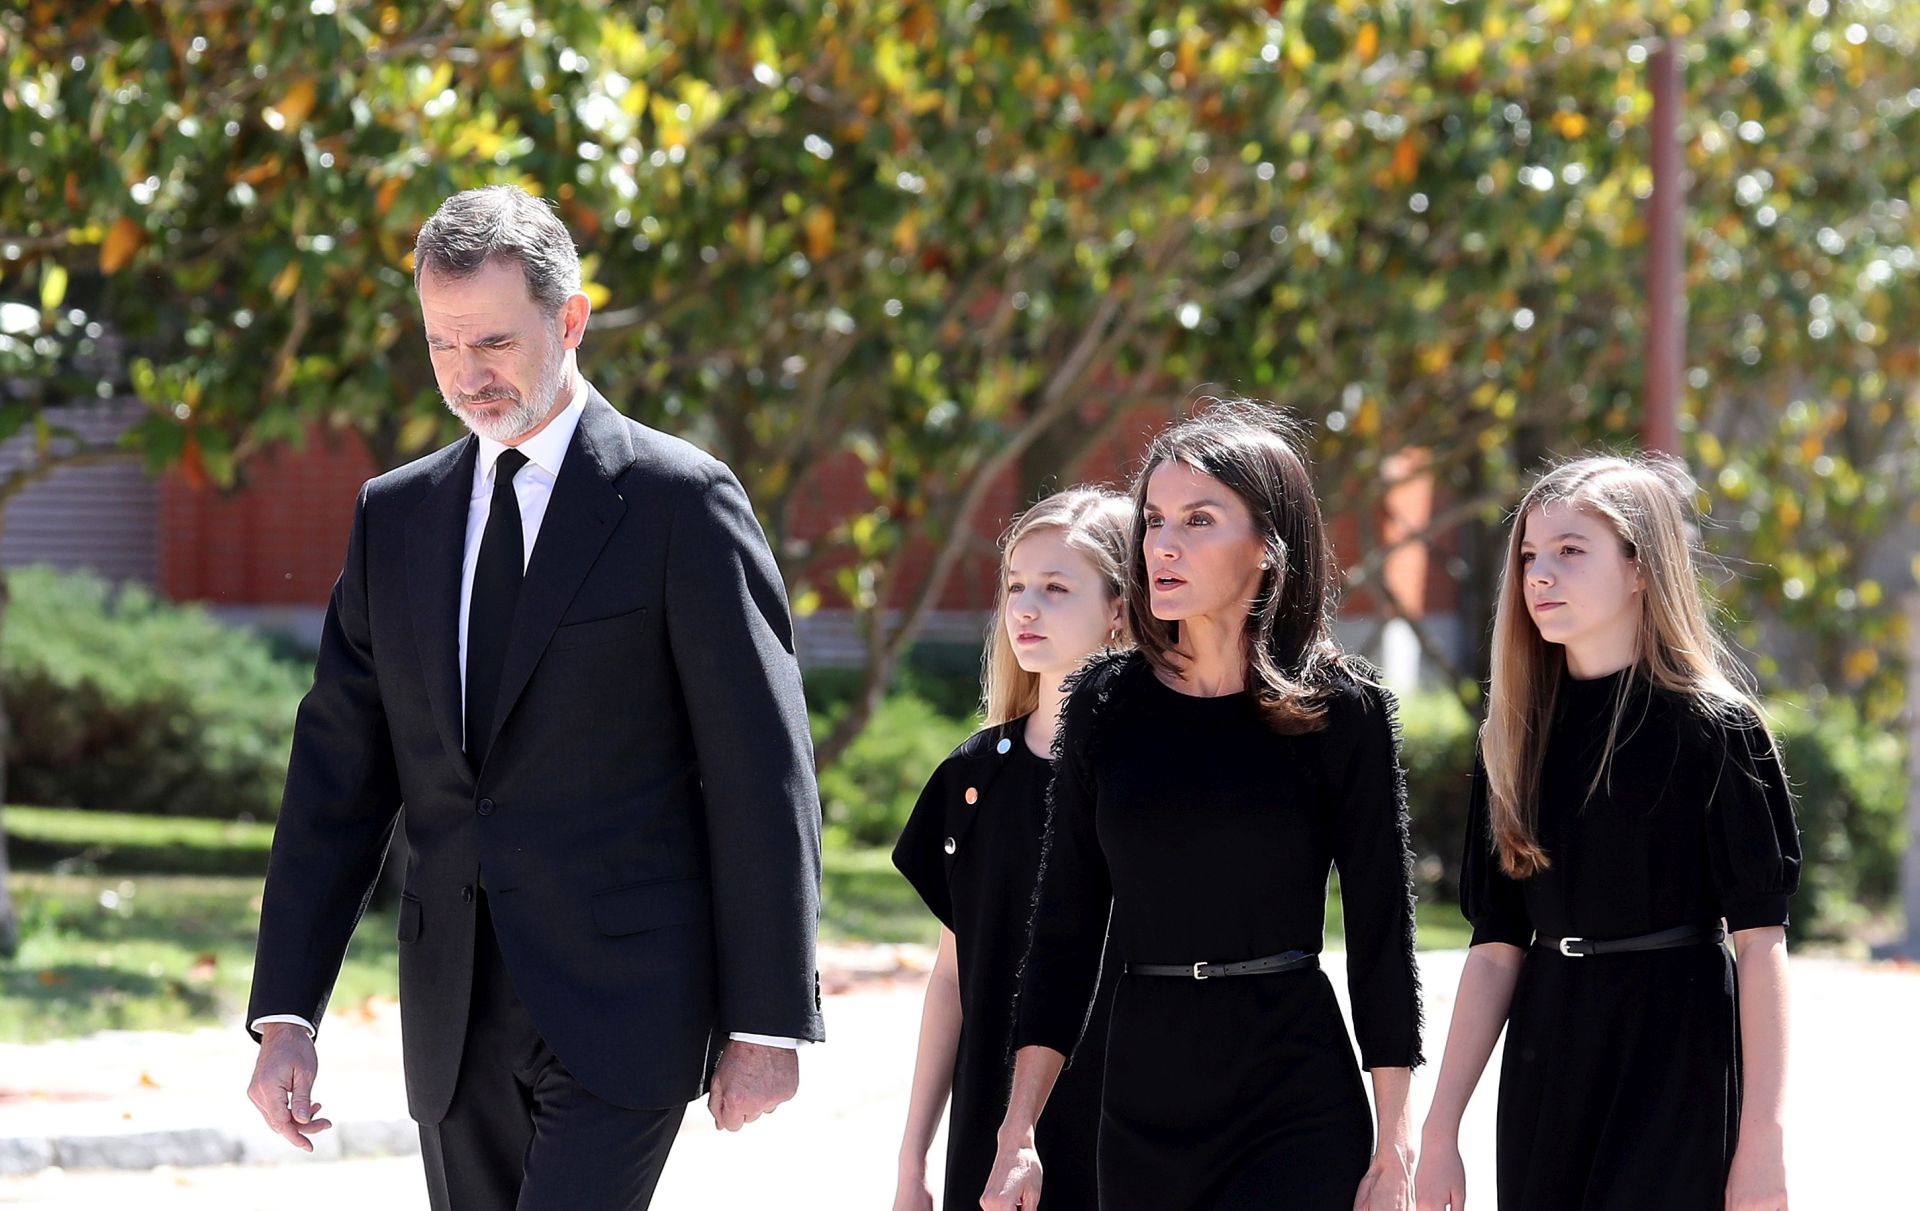 epa08446942 A handout photo made available by the Spanish Royal Household shows Spain's King Felipe (L), Queen Letizia (2-R) and their daughters Princess Leonor (2-L) and Infanta Sofia (R) arriving to attend a minute silence at the Zarzuela Palace in Madrid, Spain, 27 May 2020, on the first day of the official national mourning in memory of people who died with COVID-19. The Spanish central government announced on 26 May that the country would observe a ten-day period of national mourning to honor those who died during the ongoing coronavirus COVID-19 pandemic.  EPA/Jose Jimenez / Spanish Royal Household / HANDOUT  HANDOUT EDITORIAL USE ONLY/NO SALES